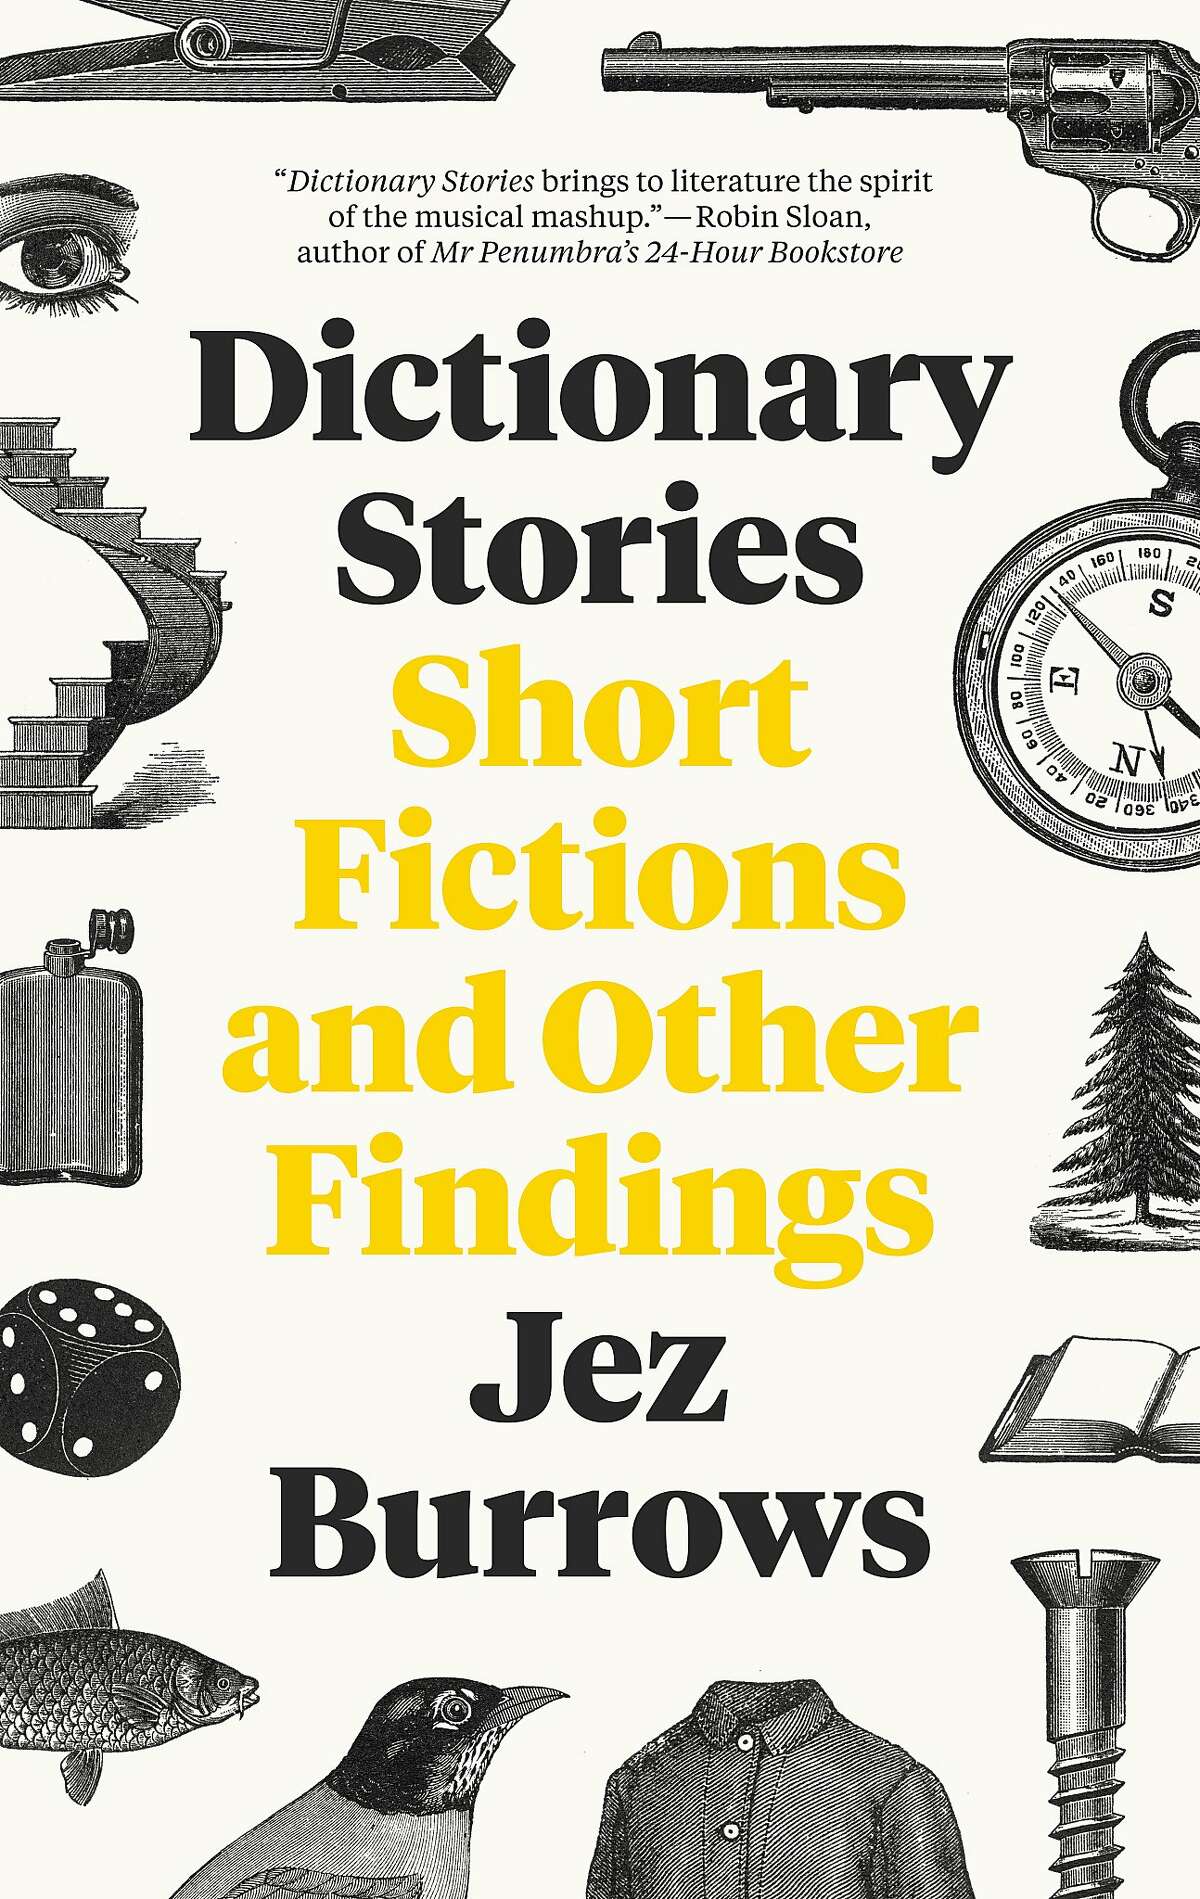 "Dictionary Stories"